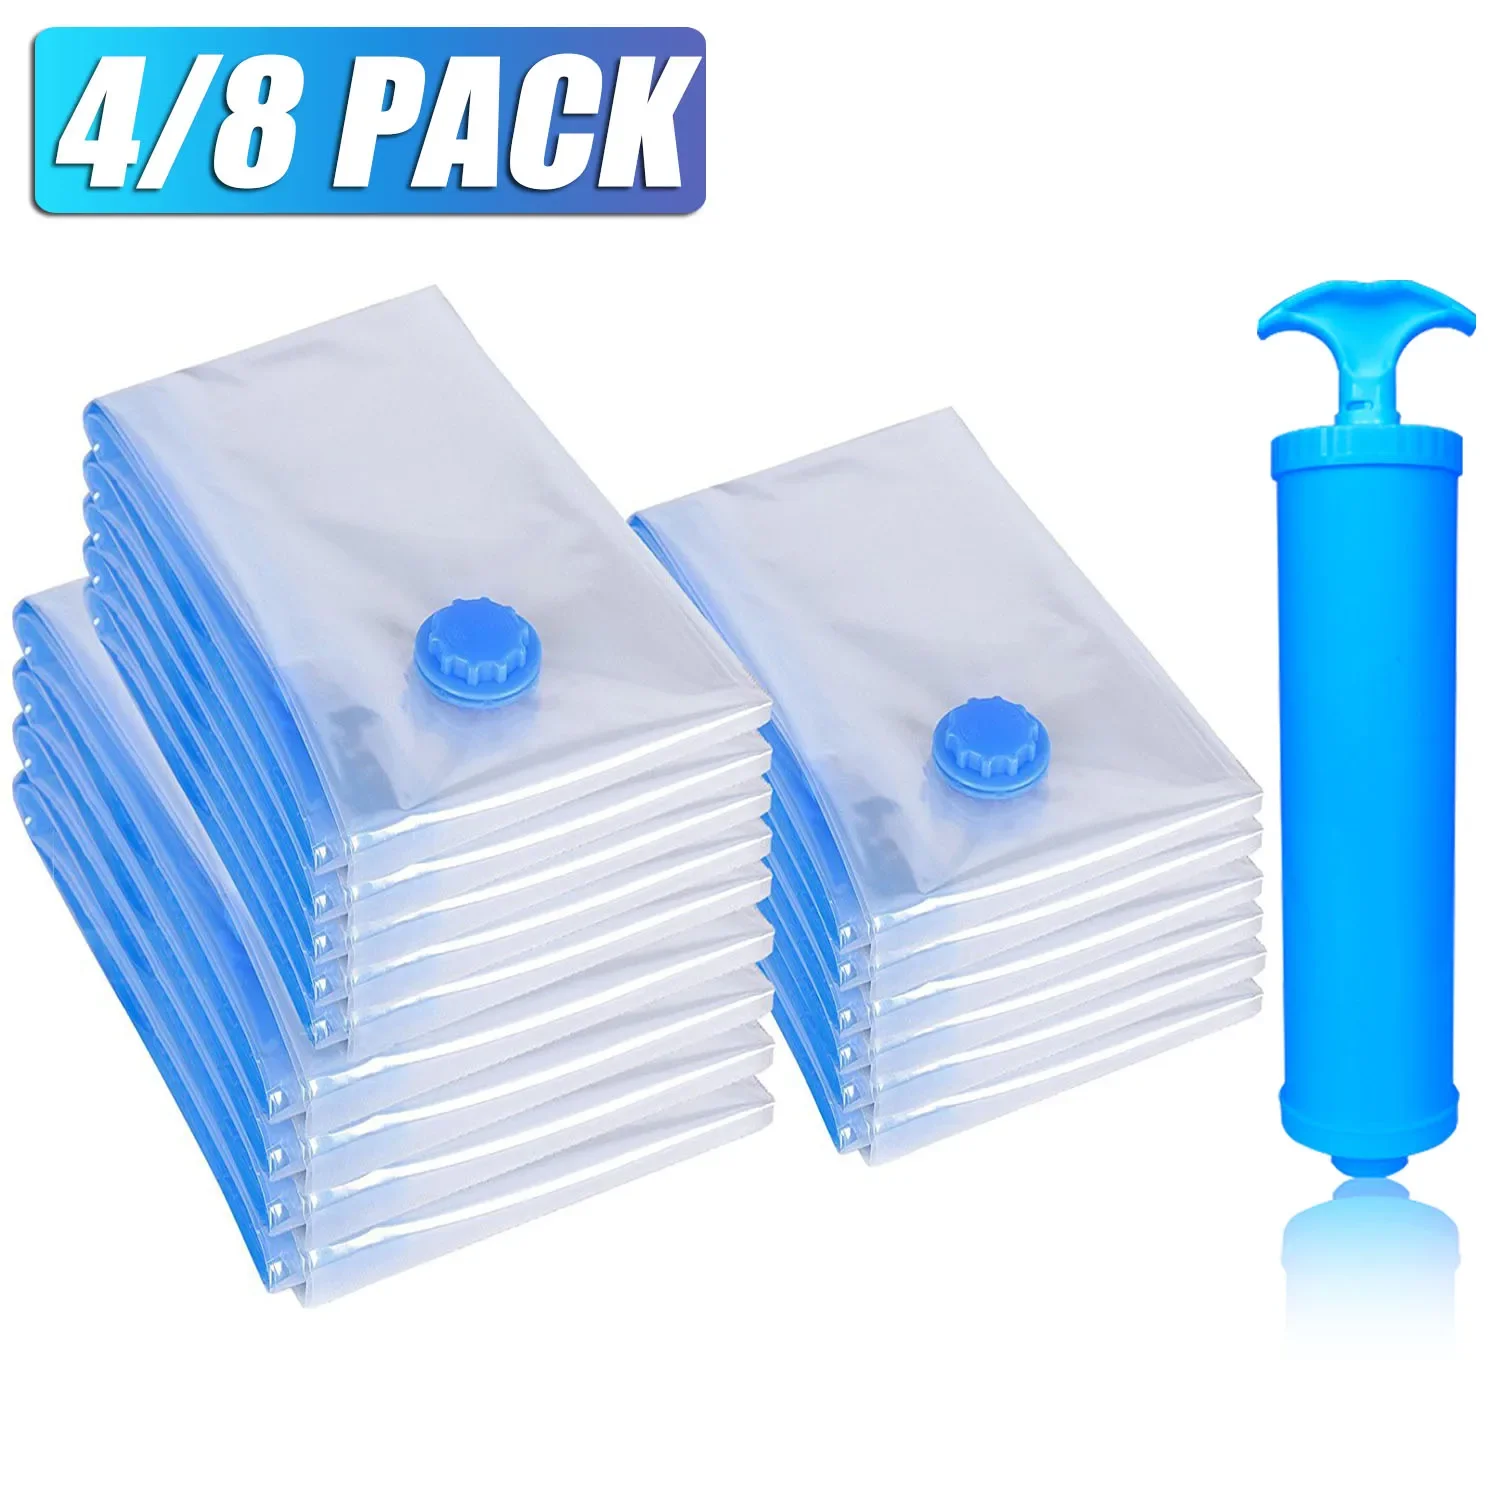 8 Pack Vacuum Storage Bags For Clothes Pillows Bedding Blanket More Space  Save Compression Travel Bags Bedding Home Organizer - AliExpress